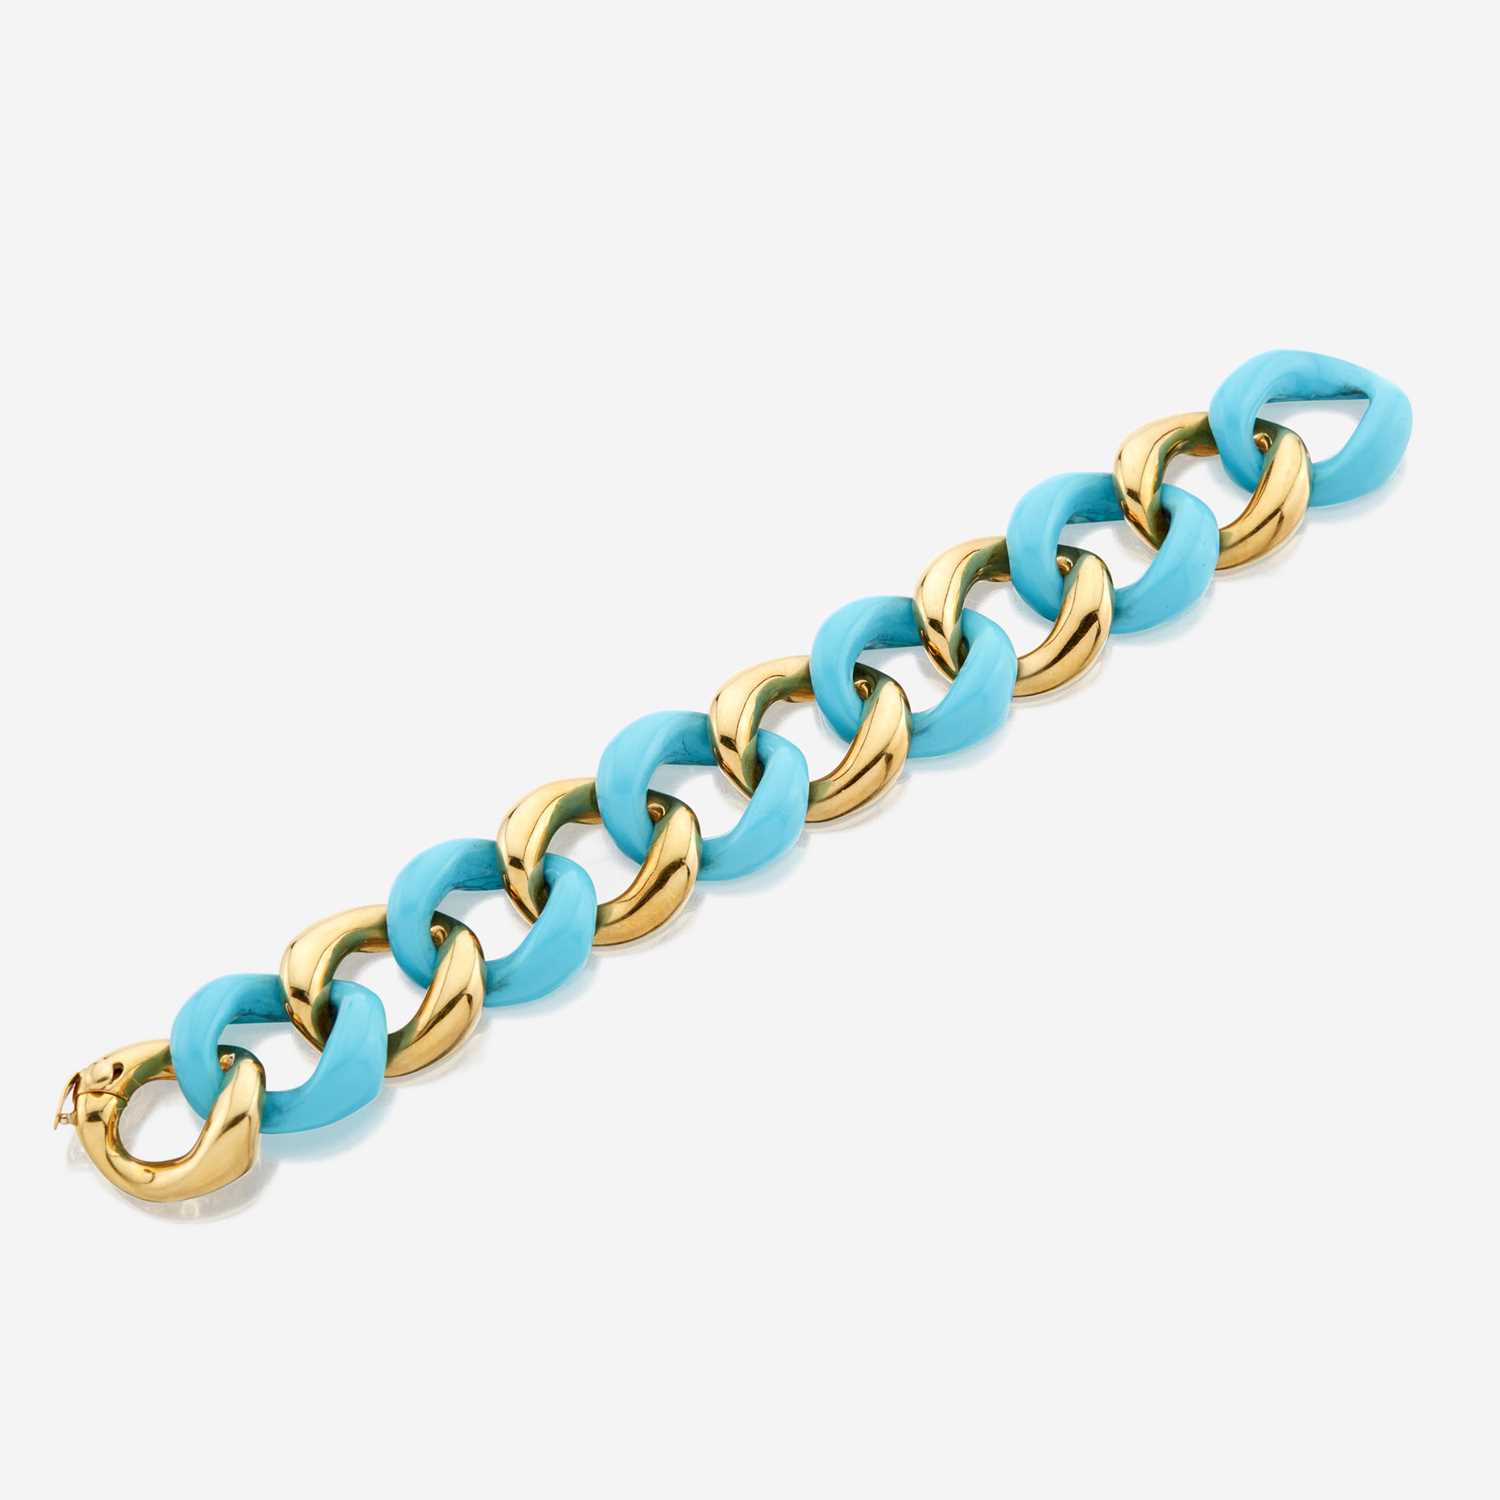 Lot 71 - A gold and turquoise bracelet, Seaman Schepps